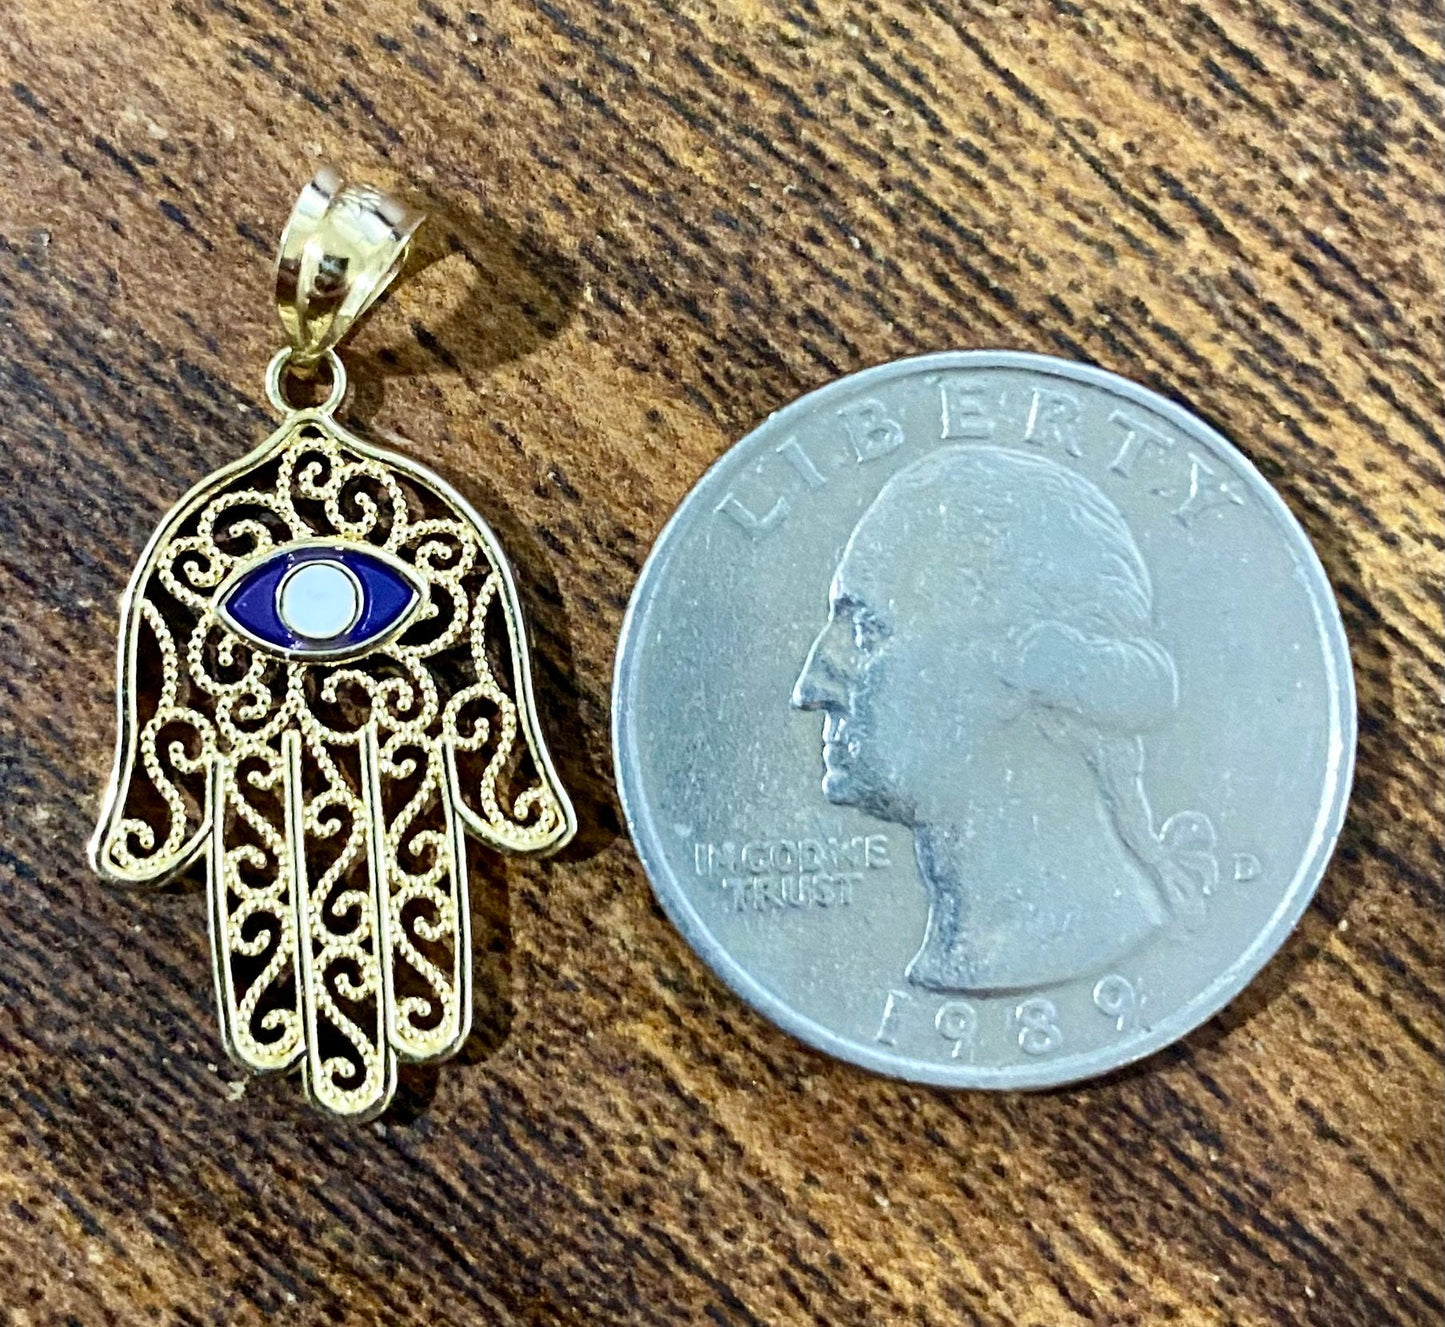 14k Polished and Enameled Solid Yellow Gold Hamsa or Chamseh Evil Eye Pendant Charm for a Chain or Necklace 1" Long Not Gold Plated.